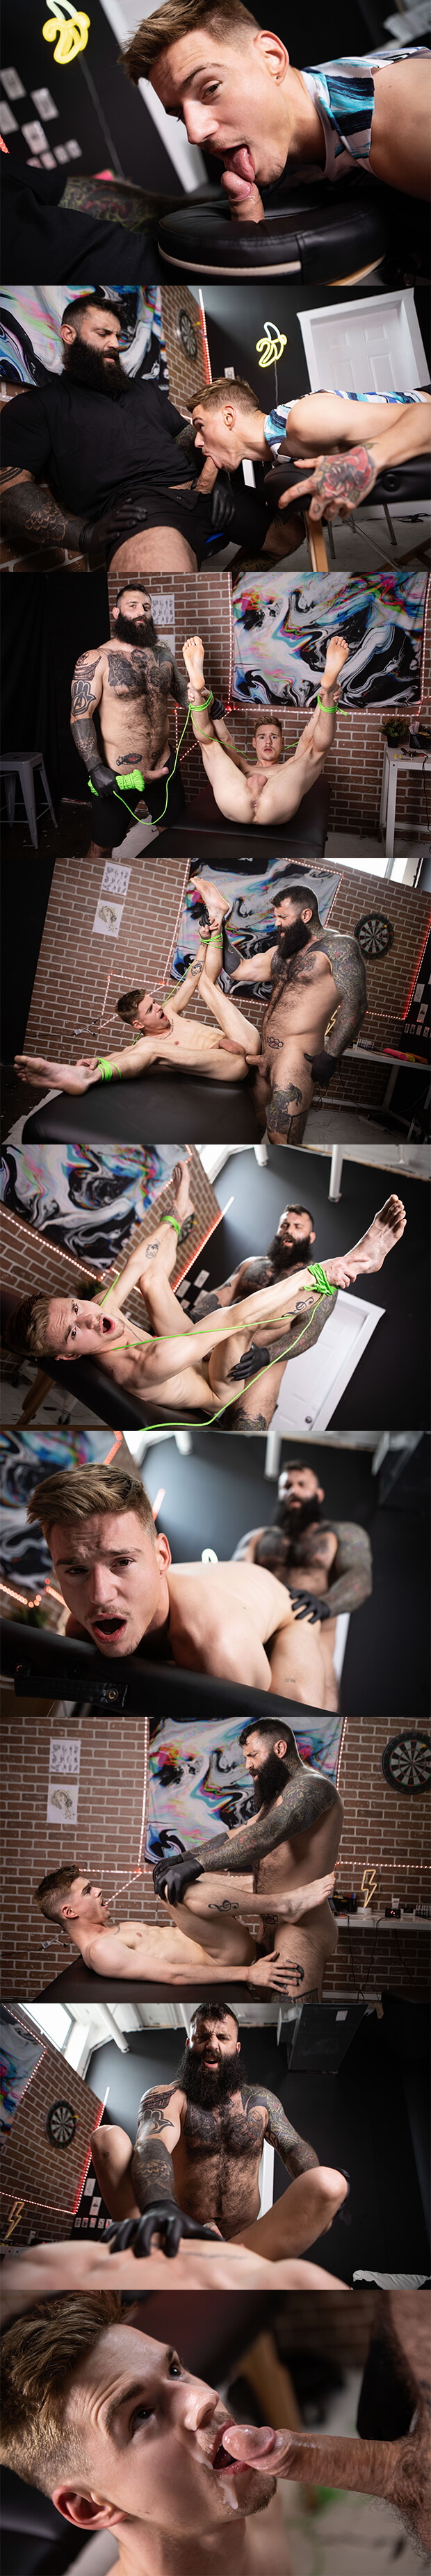 Bromo | Tied and Tatted (Markus Kage & Lev Ivankov)